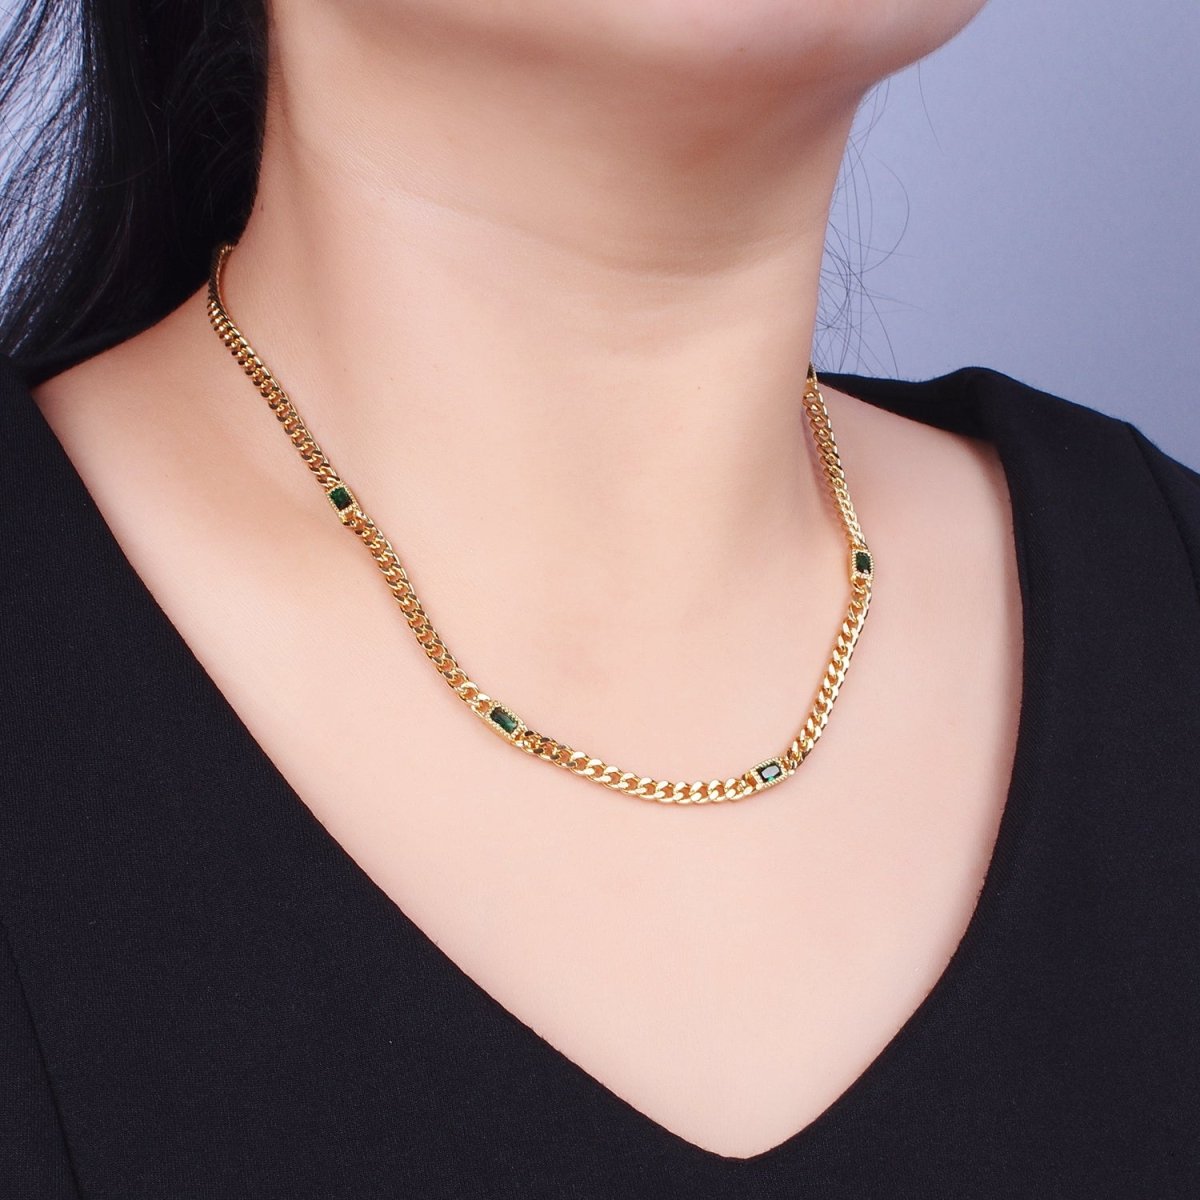 24K Gold Filled Clear, Green, Blue, Baguette CZ 3.8mm Curb Chain 19 Inch Necklace | WA-1509 - WA-1511 Clearance Pricing - DLUXCA